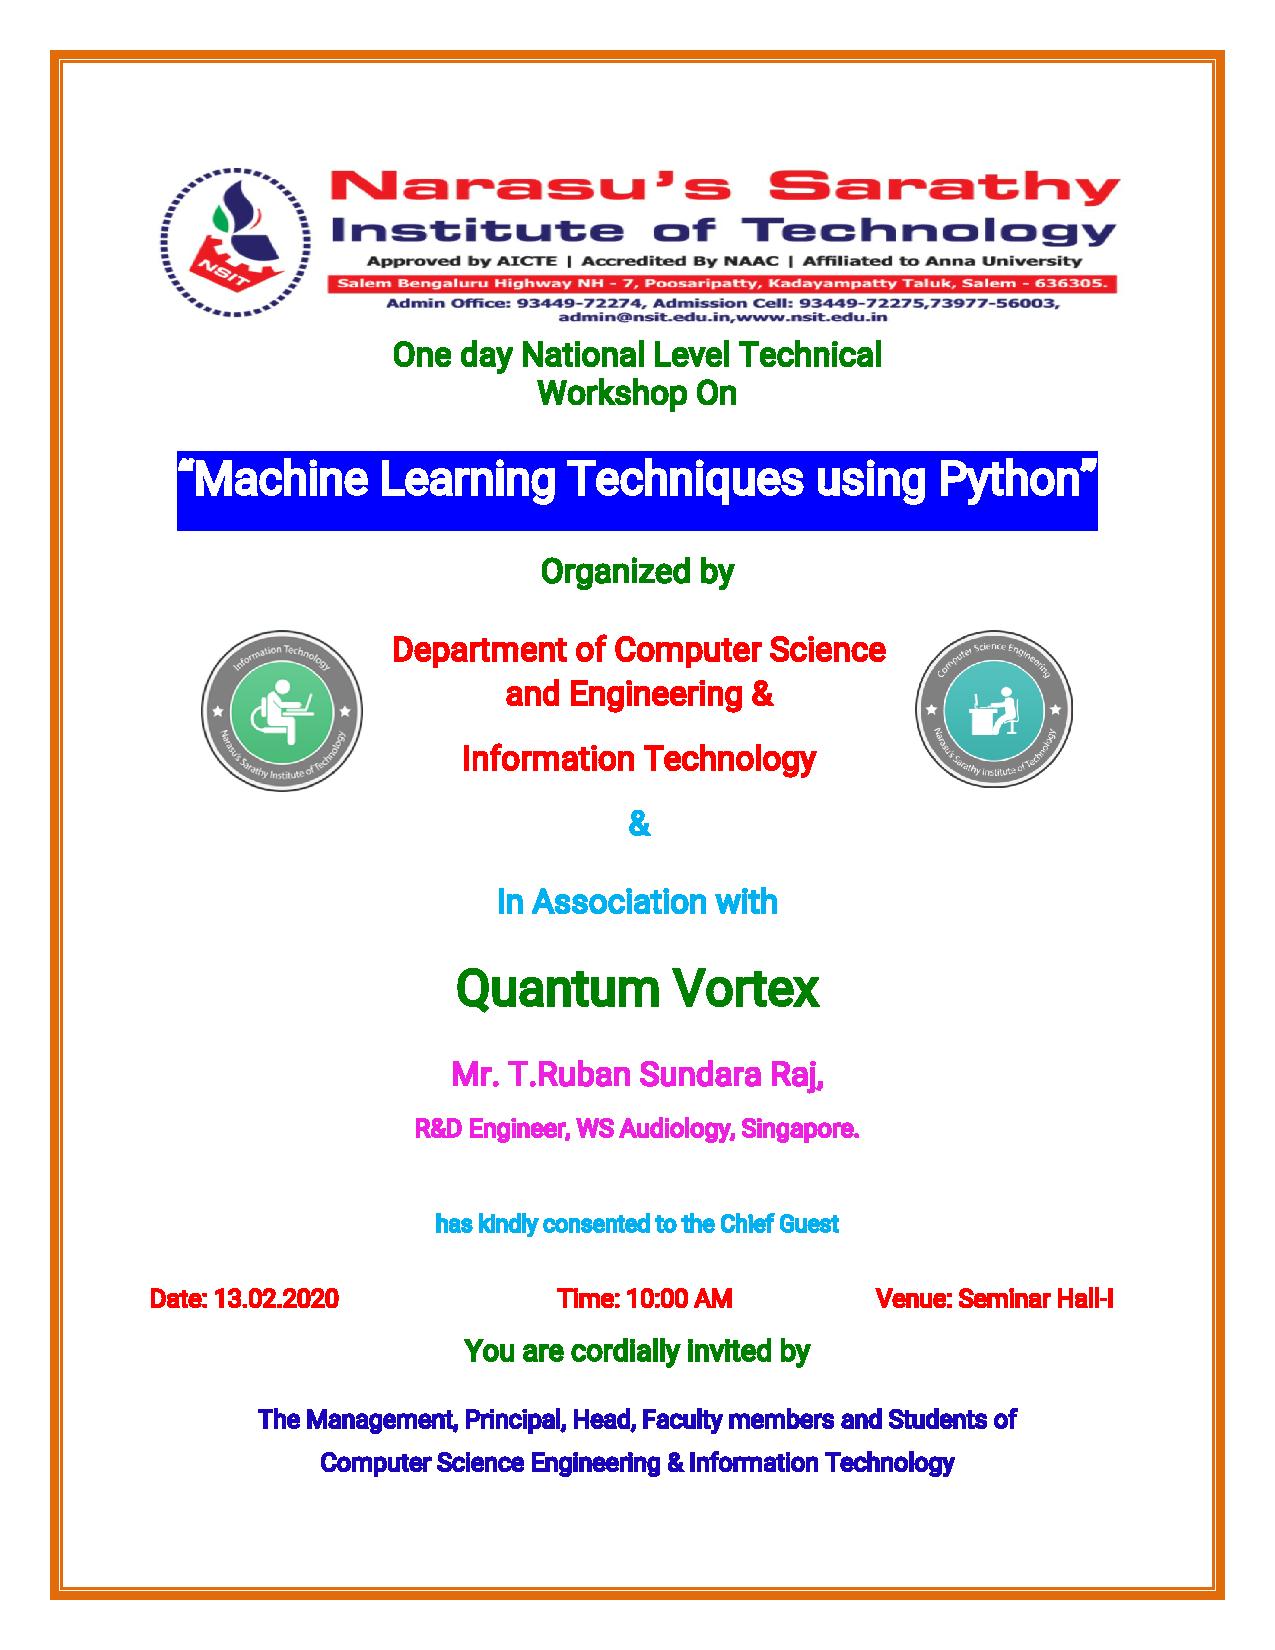 One Day National level workshop on Machine Learning Techniques Using Python 2020